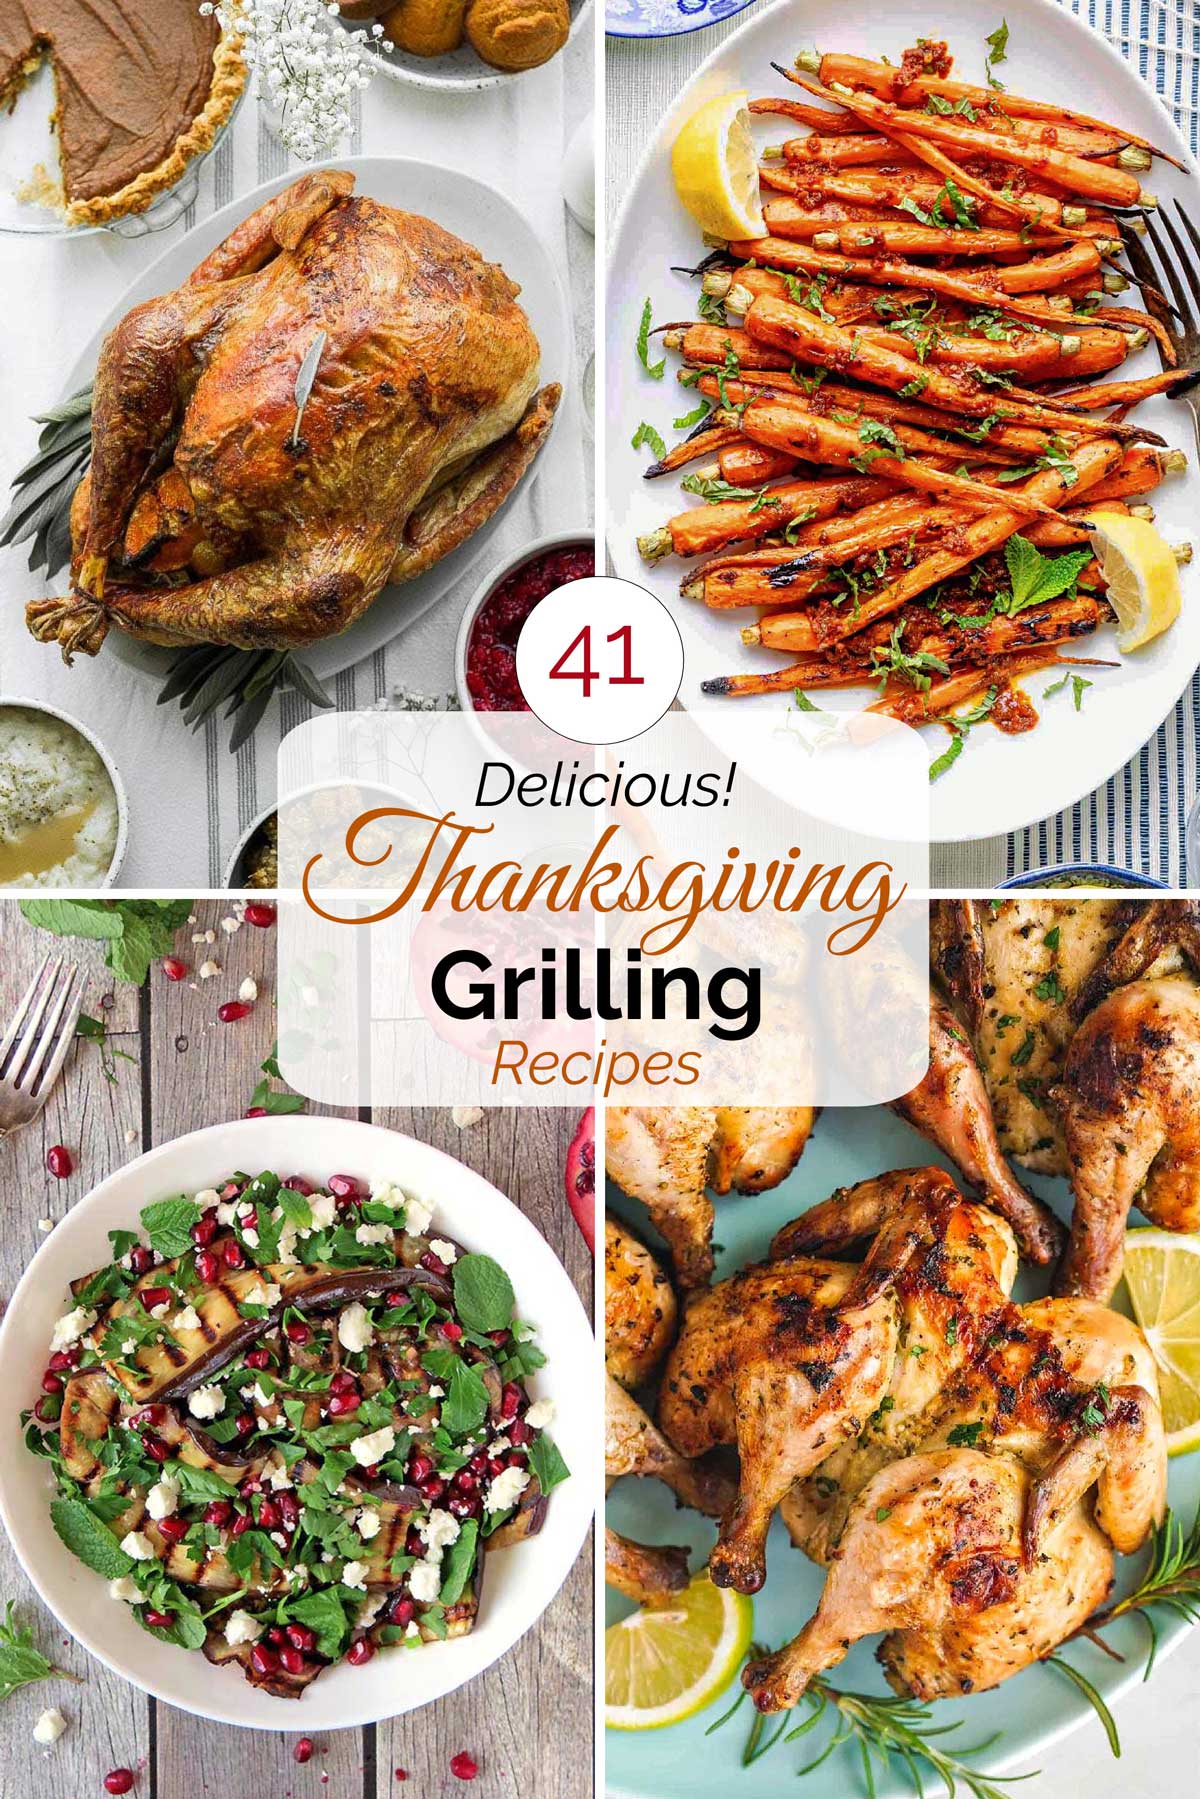 Collage of four recipe photos with text overlay reading "41 Delicious! Thanksgiving Grilling Recipes".